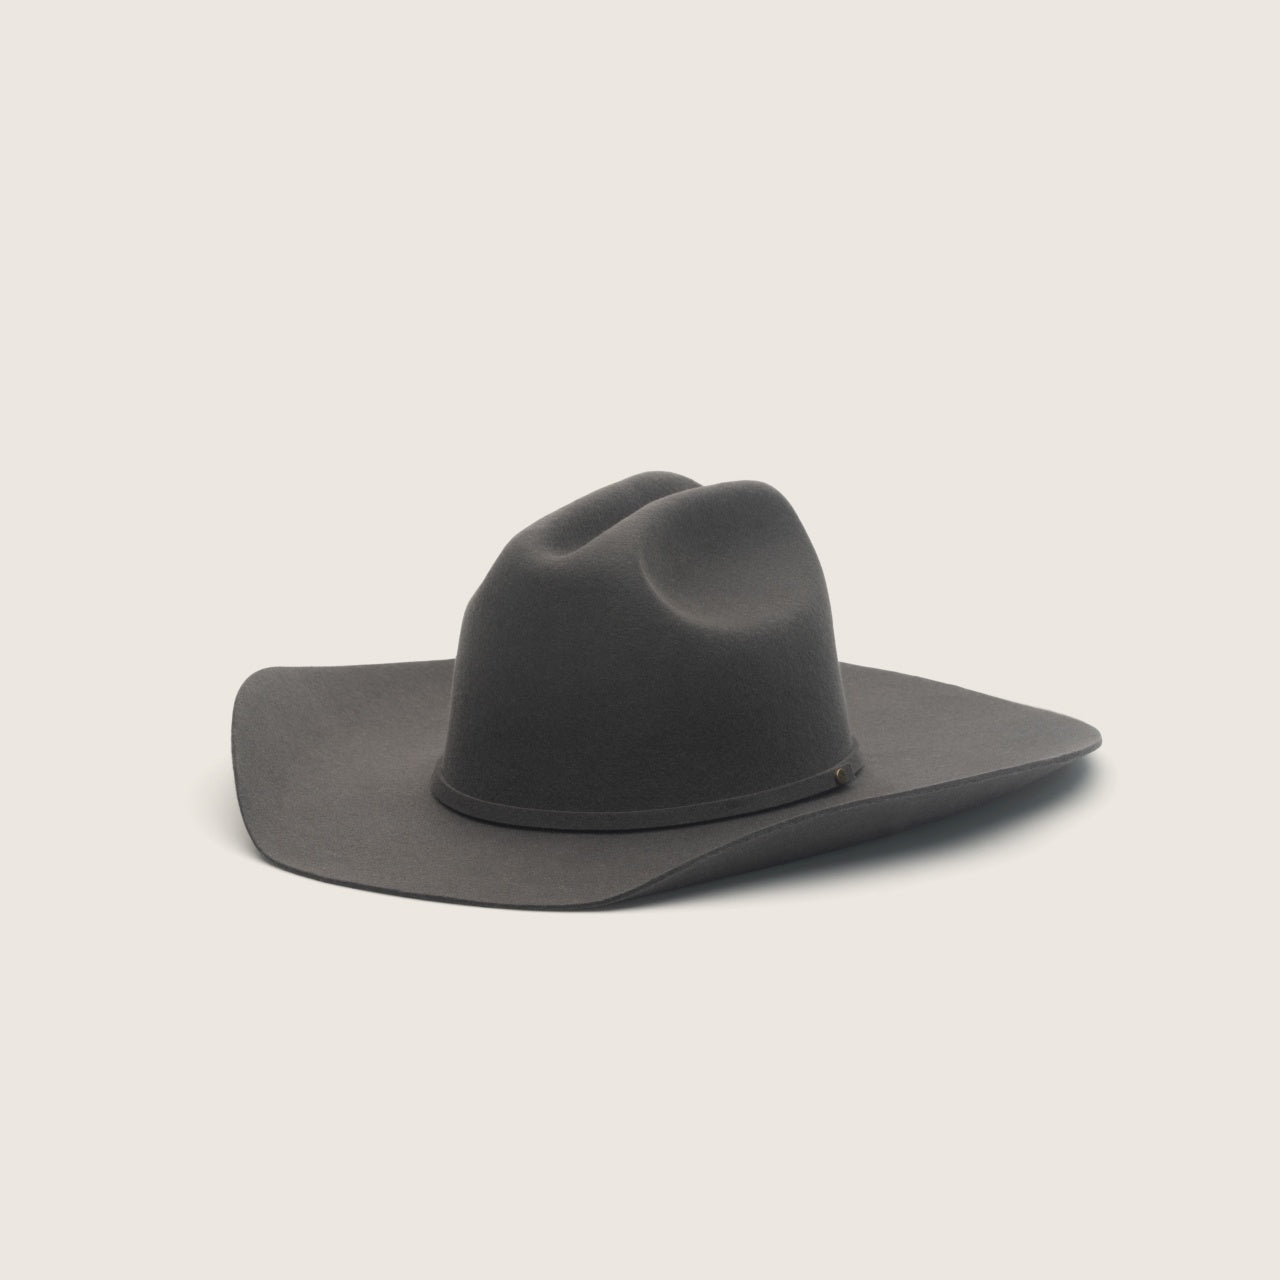 Buck Smoke Black Cowboy and cowgirl hat front